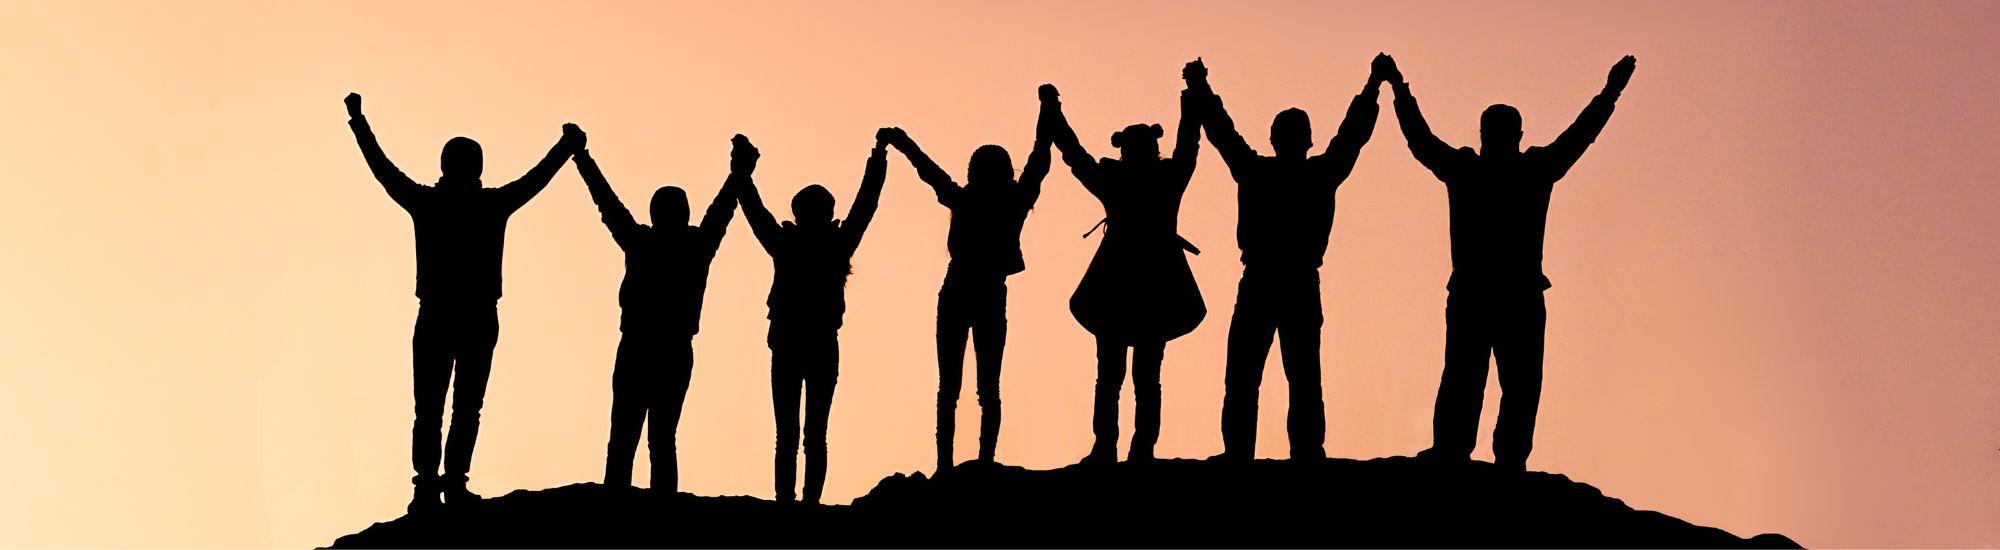 seven shadowed people standing with arms raised holding hands